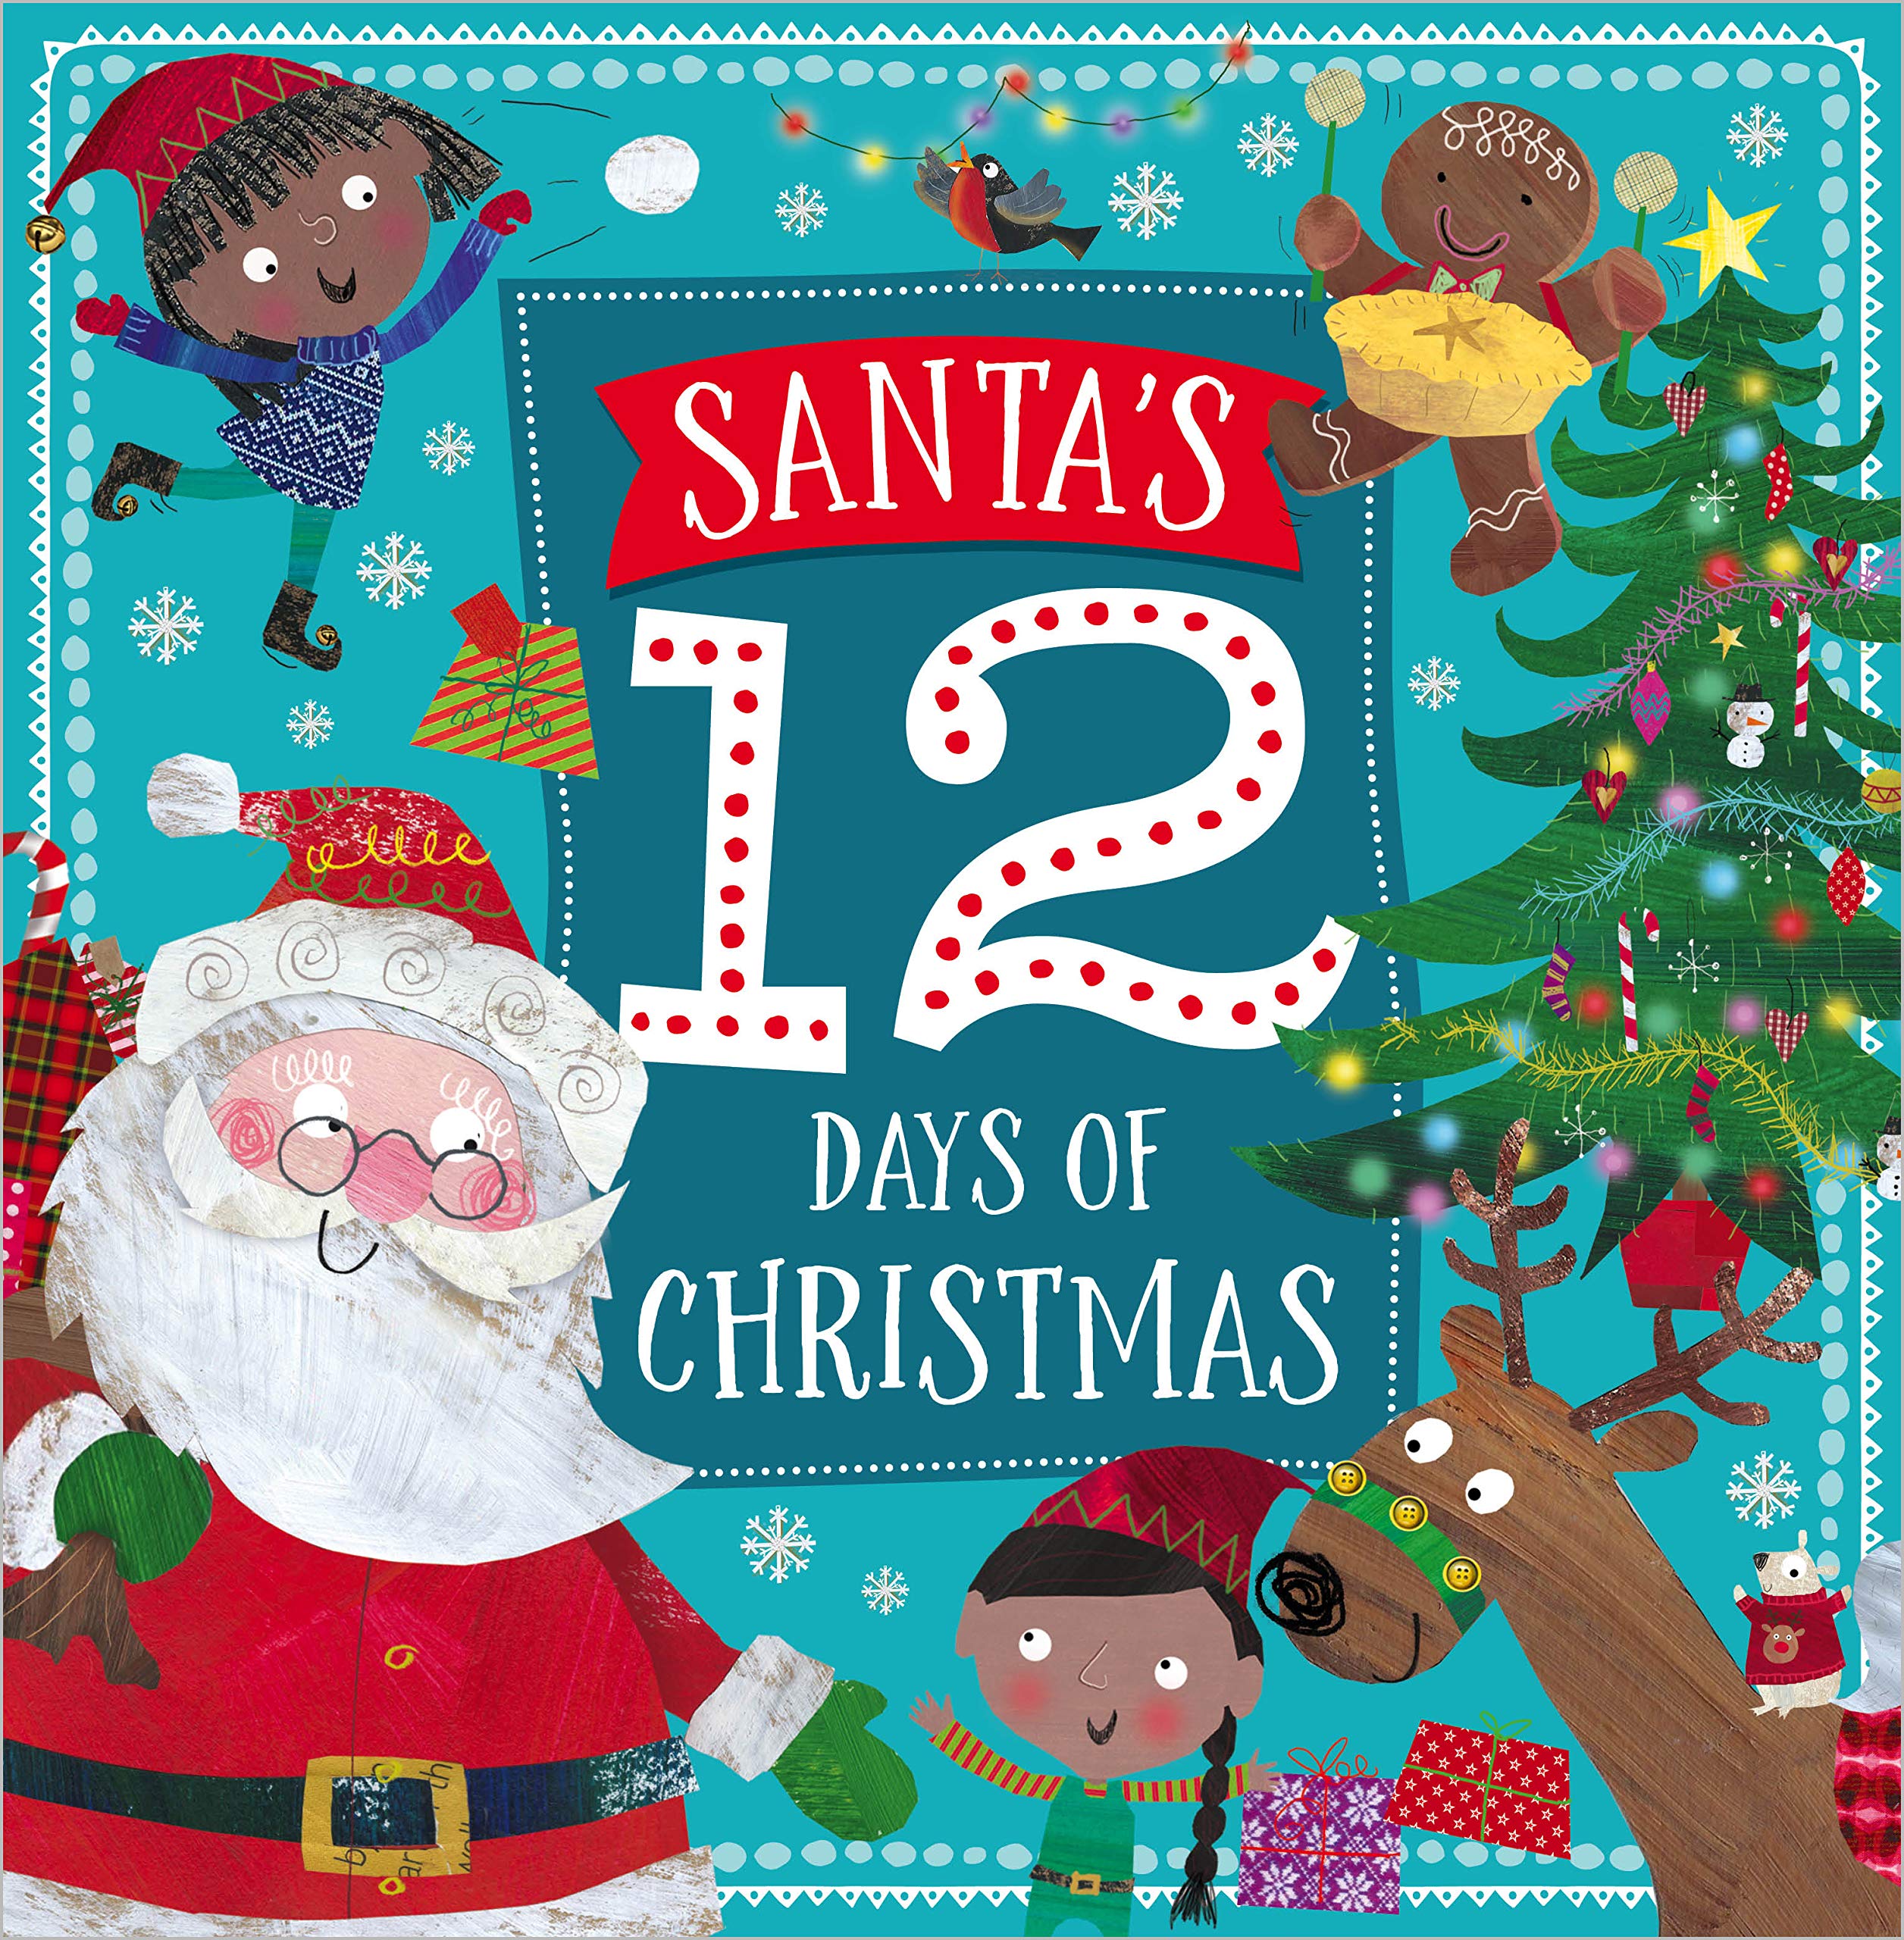 Santa's Twelve Days of Christmas - Alex Robinson and Clare Fennell